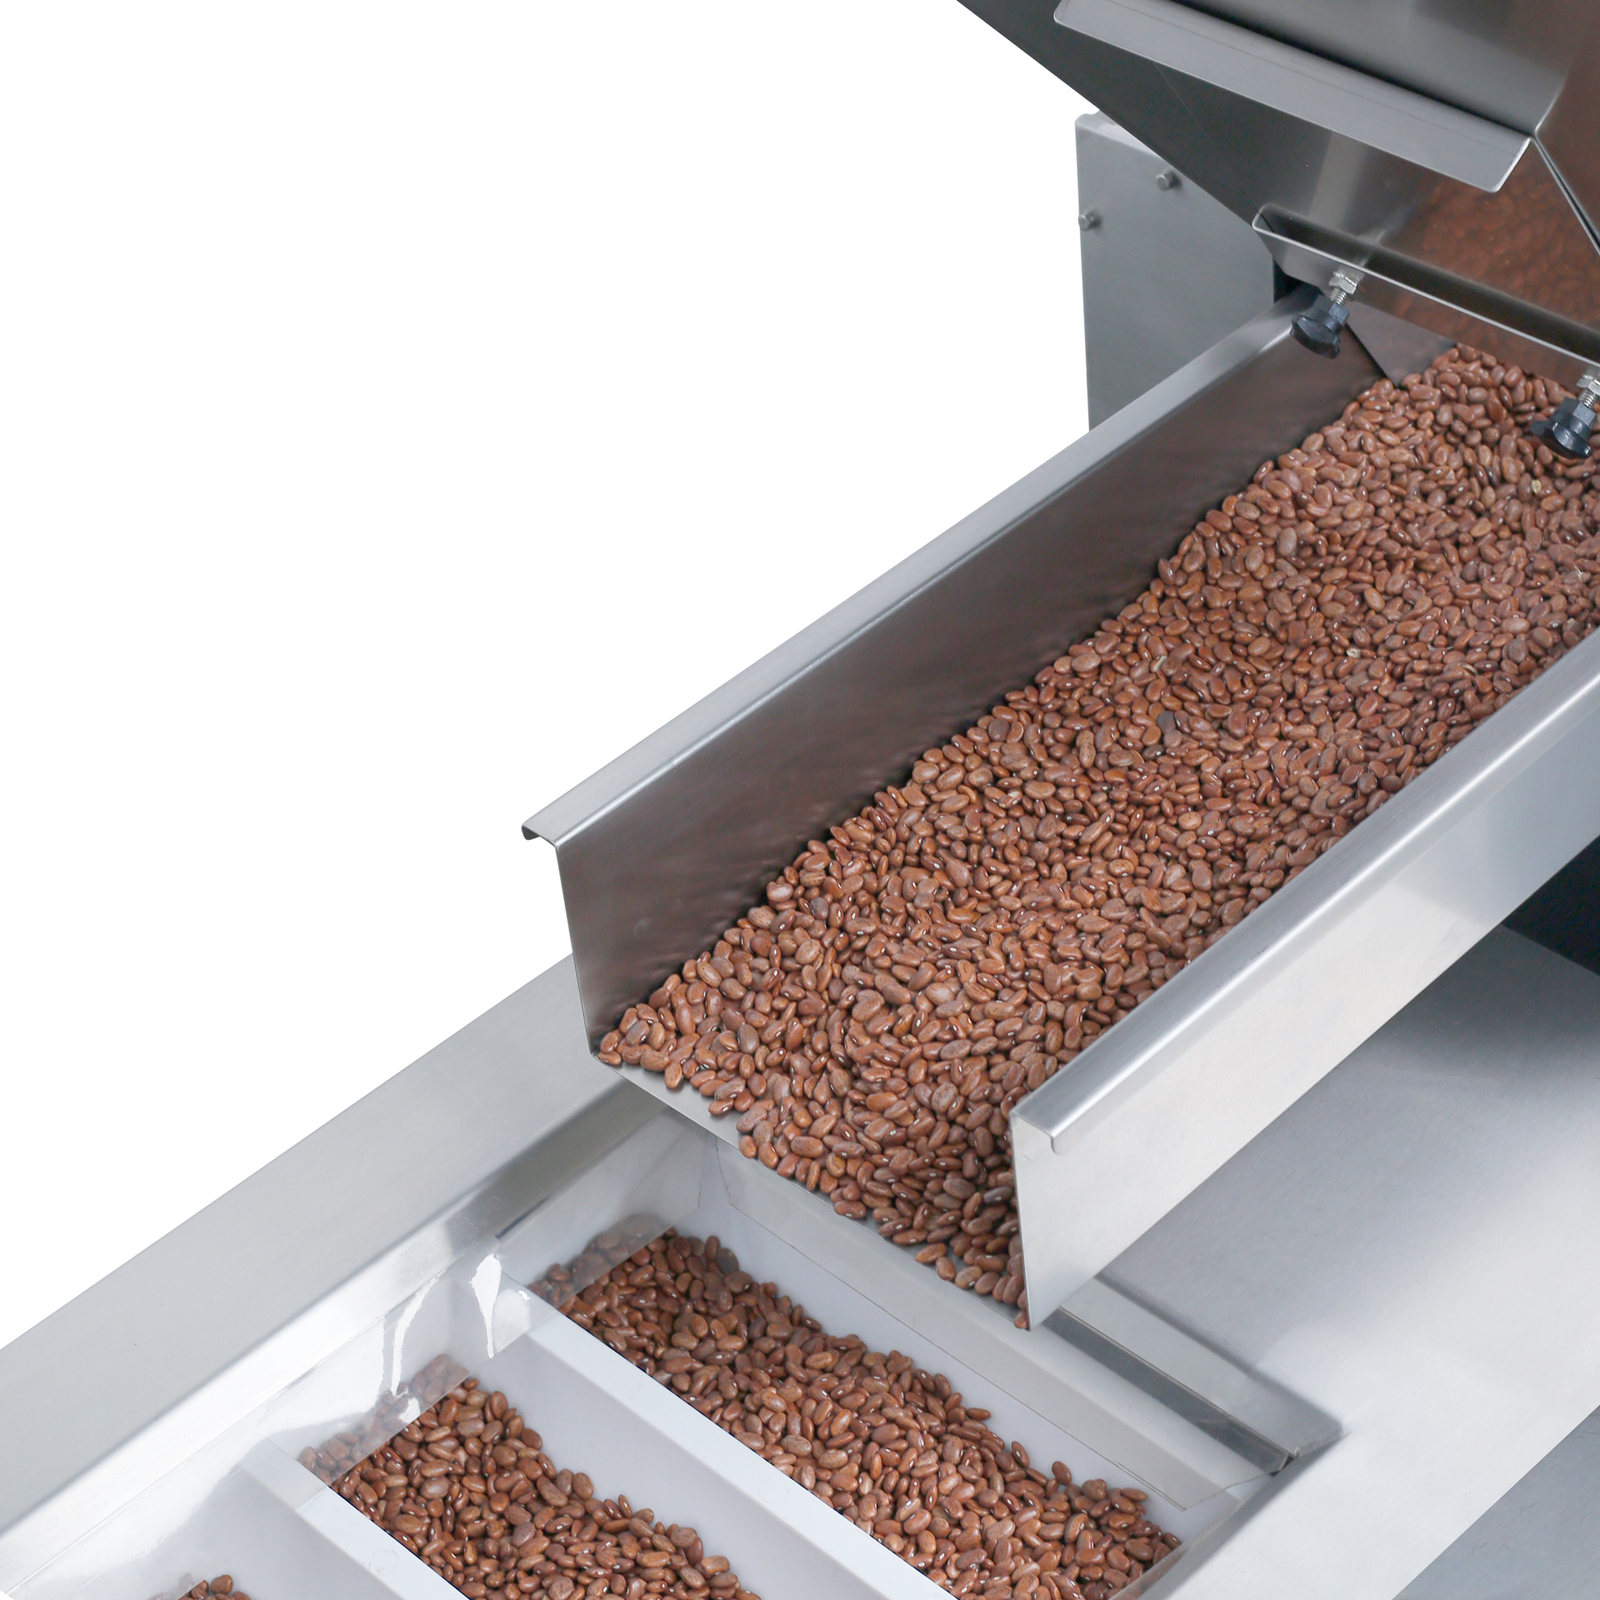 Close-up of the vibratory feeder dispensing red beans onto the moving conveyor of the Jorestech stainless steel bucket elevator